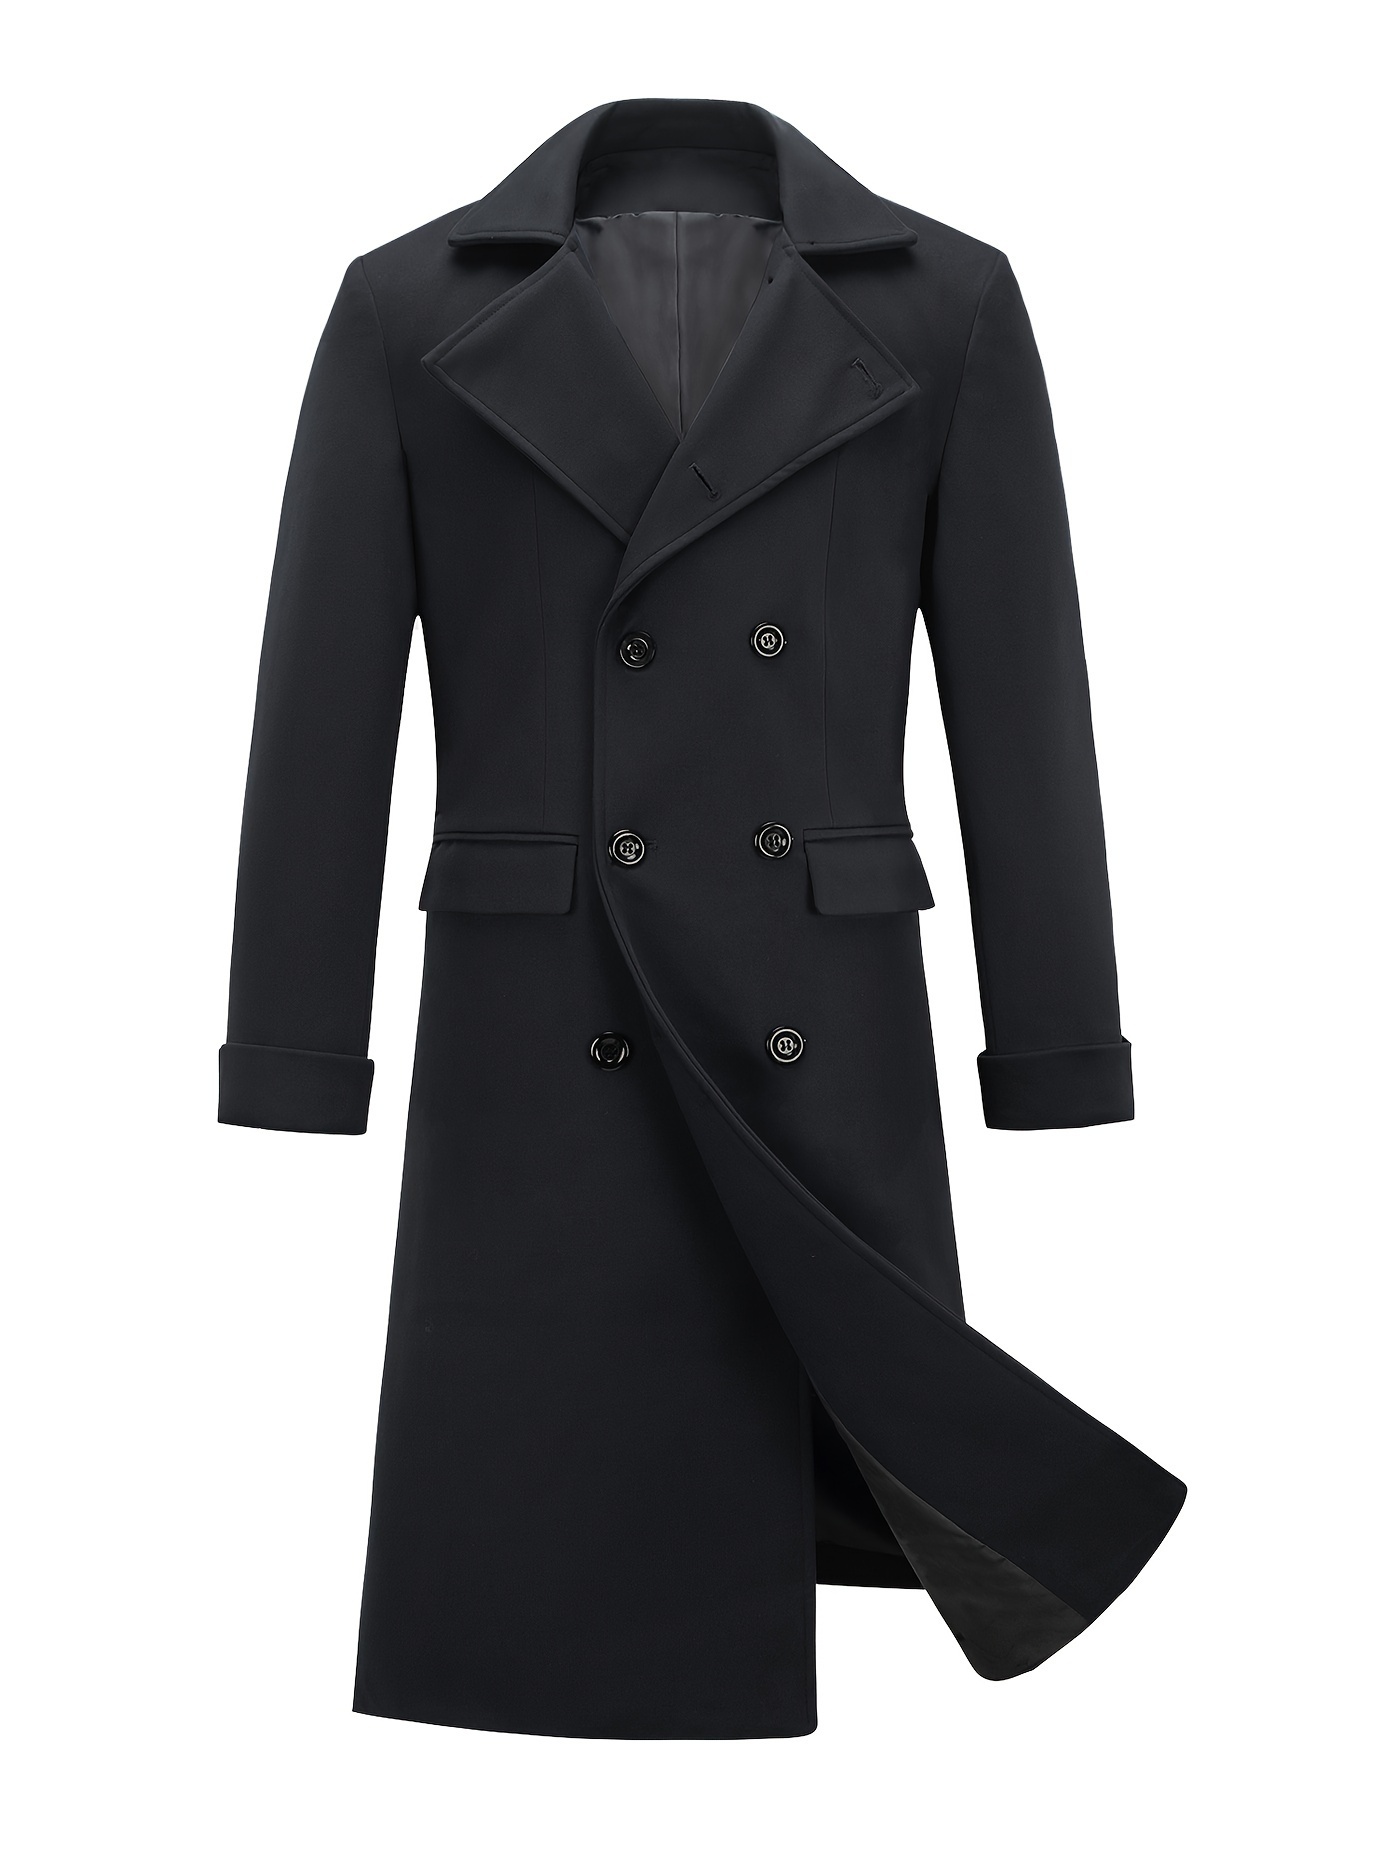 mens notch lapel double breasted long trench coat casual windproof overcoat details 25